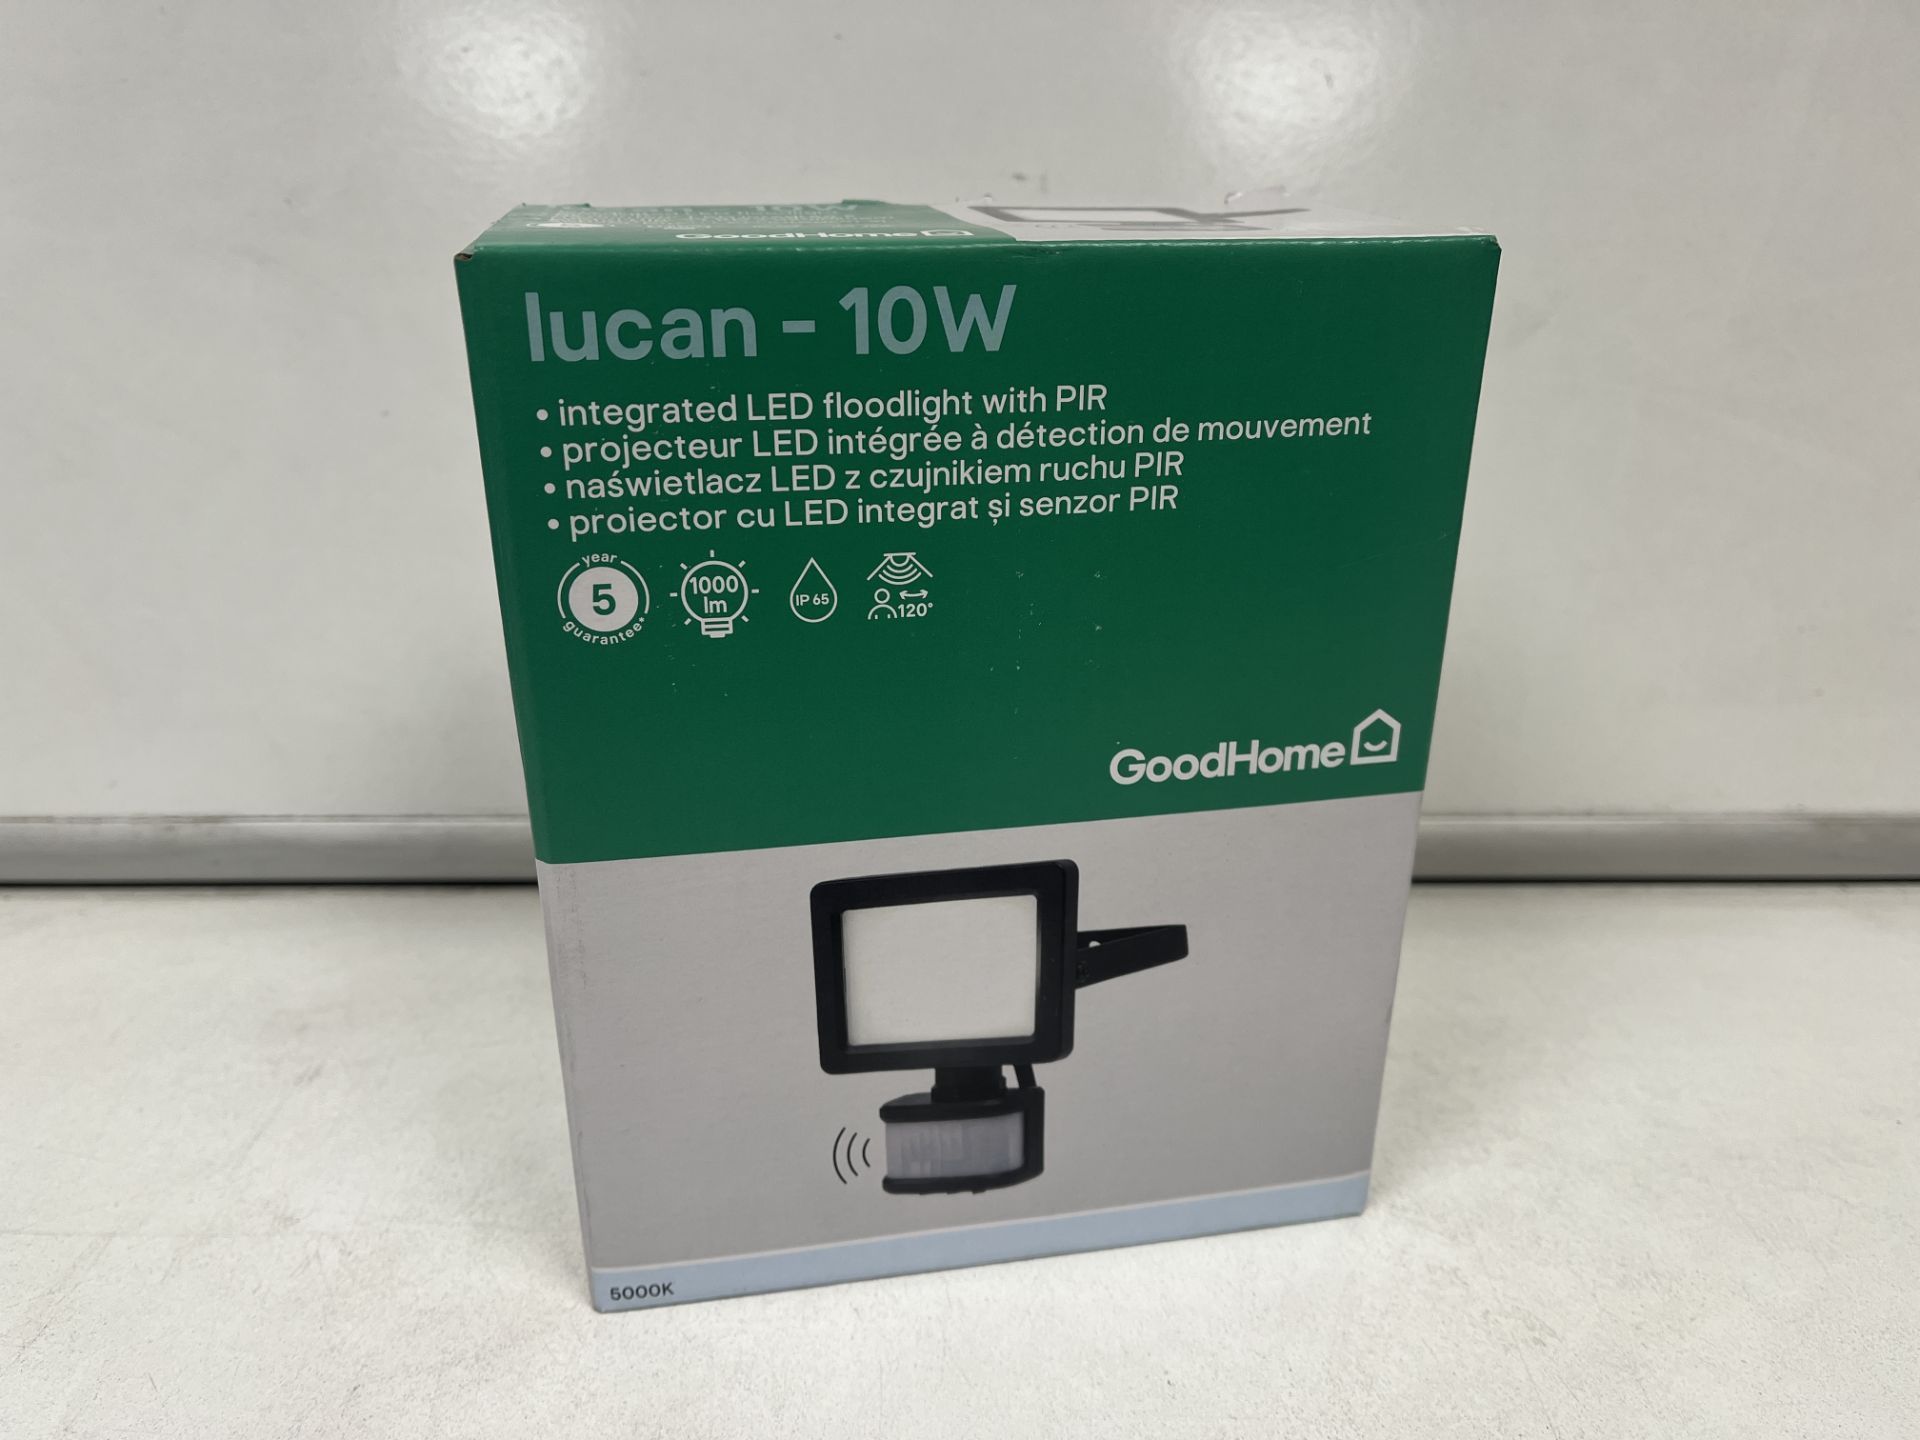 8 X NEW BOXED GOODHOME LUCAN 10W INTEGRATED LED FLOODLIGHT WITH PIR. 1000 LUMENS. ROW5.8RACK